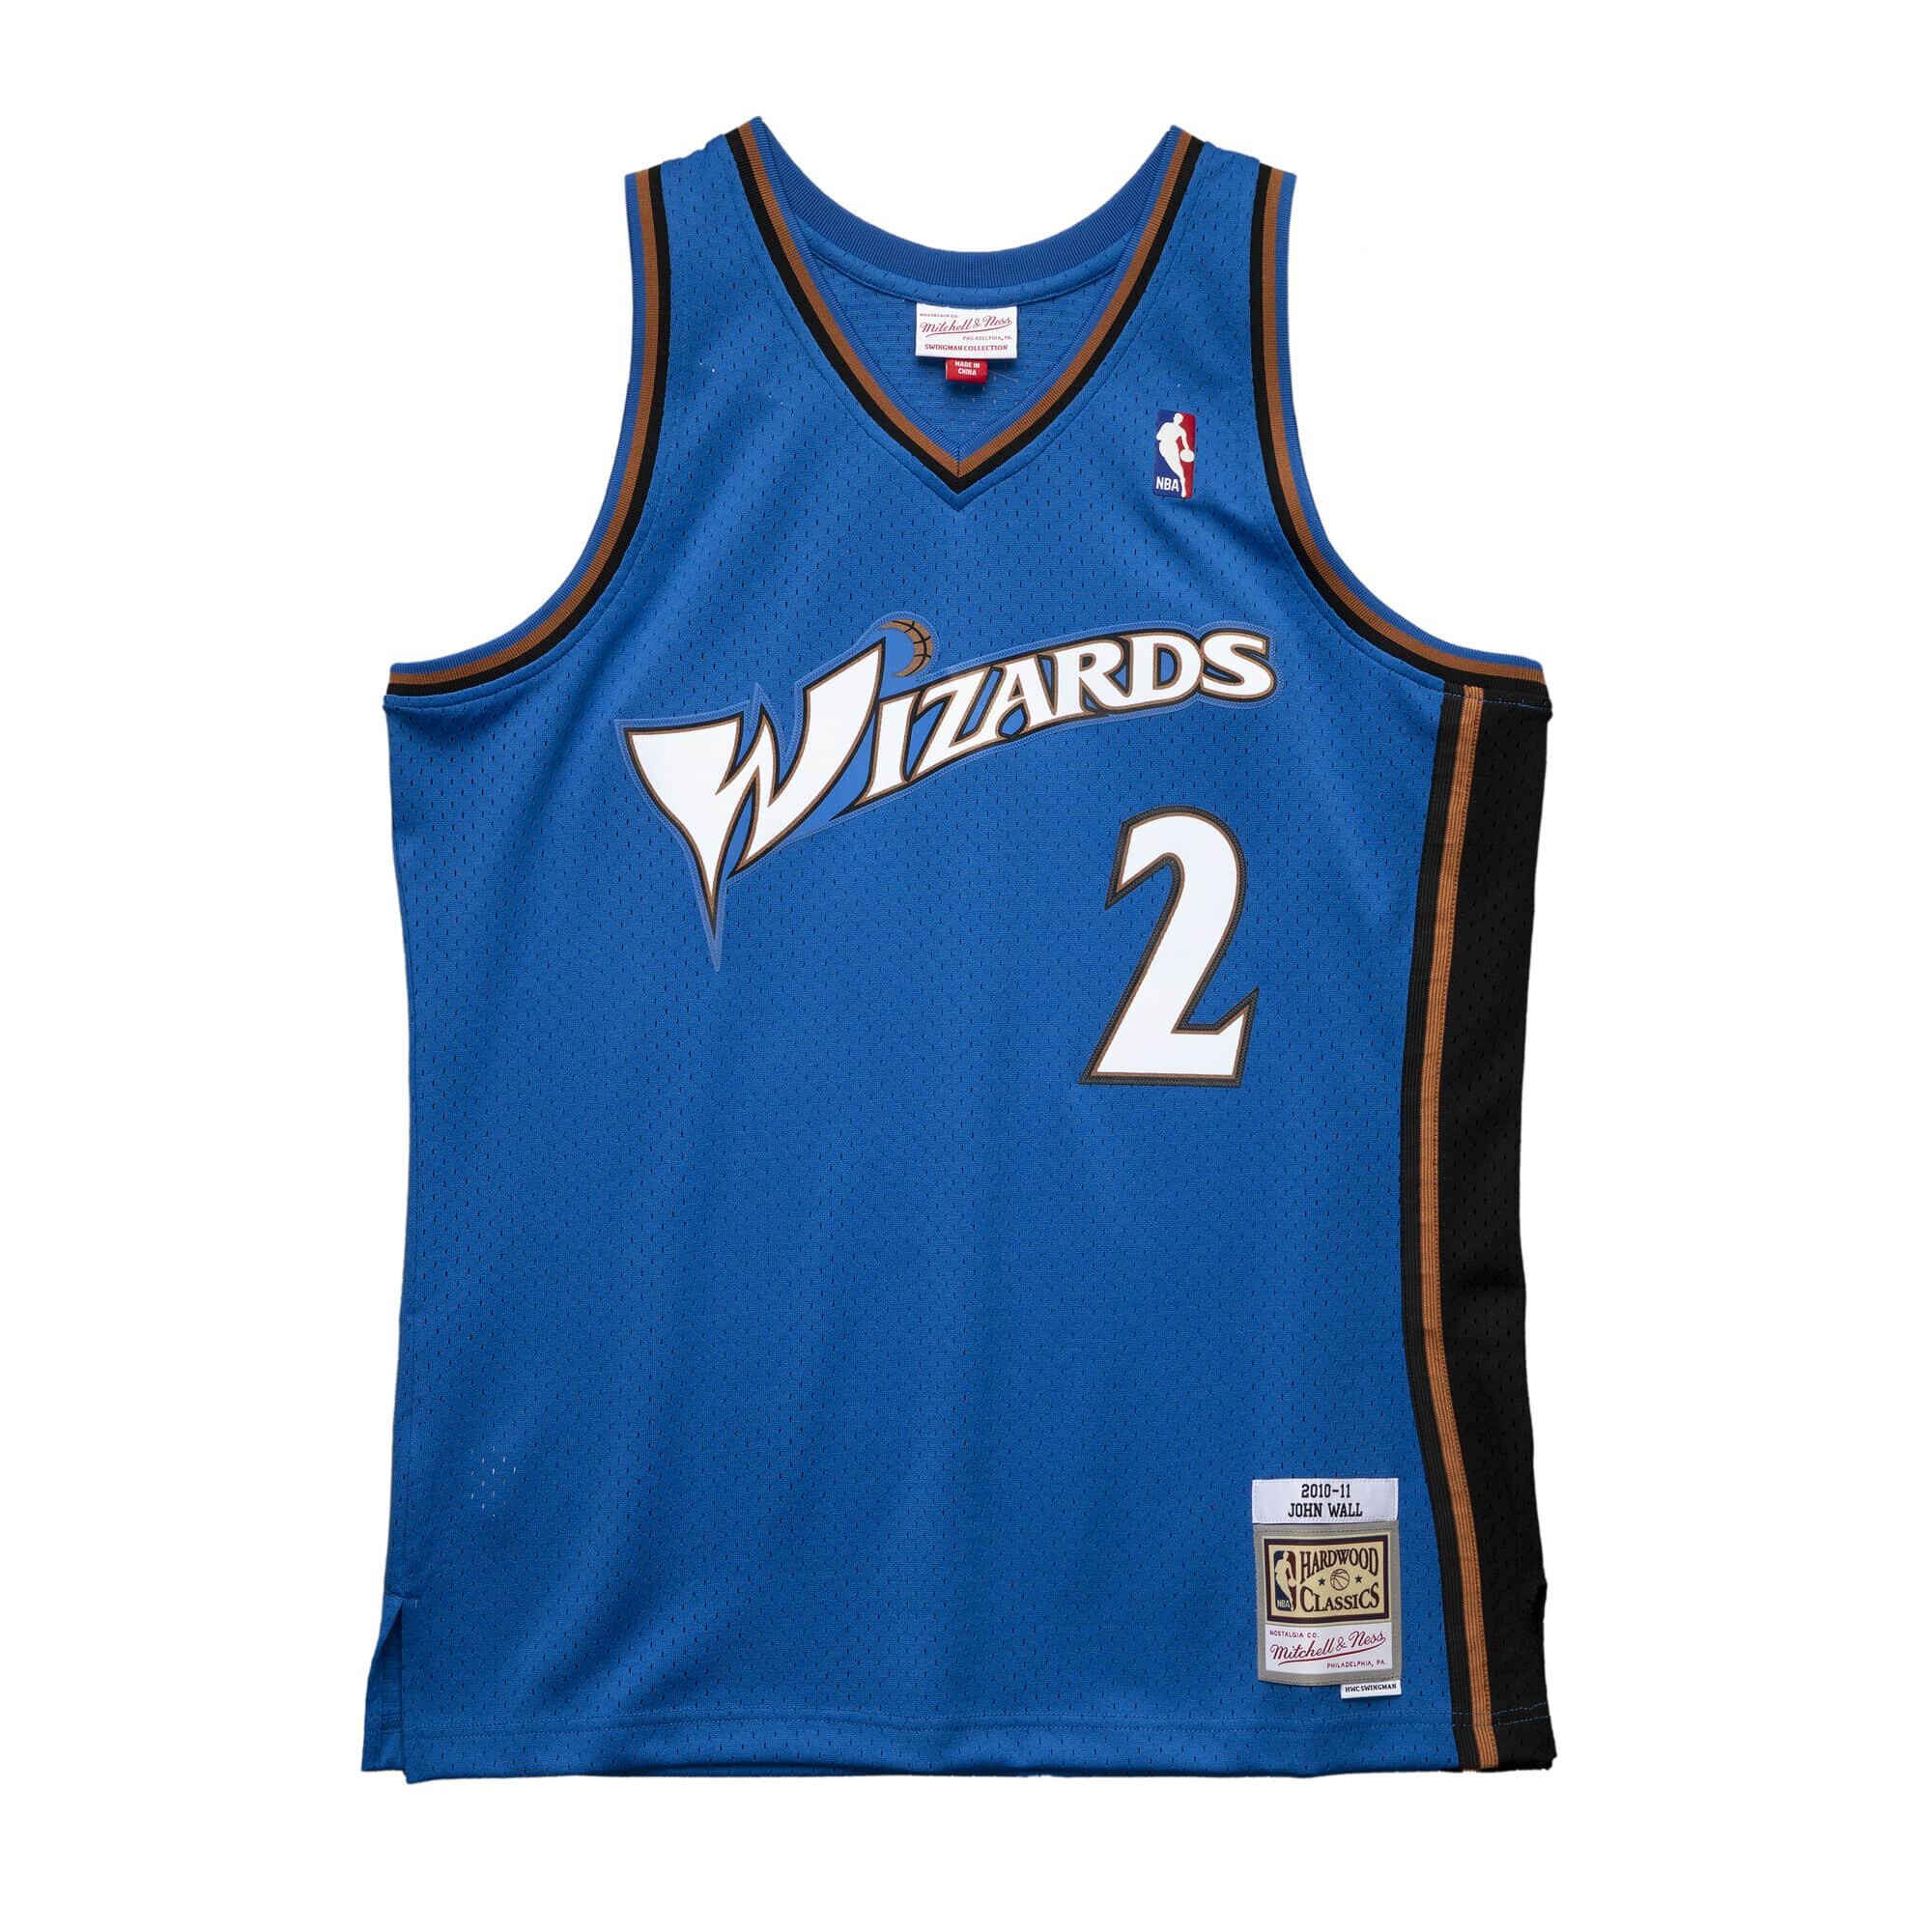 wizards blue jersey